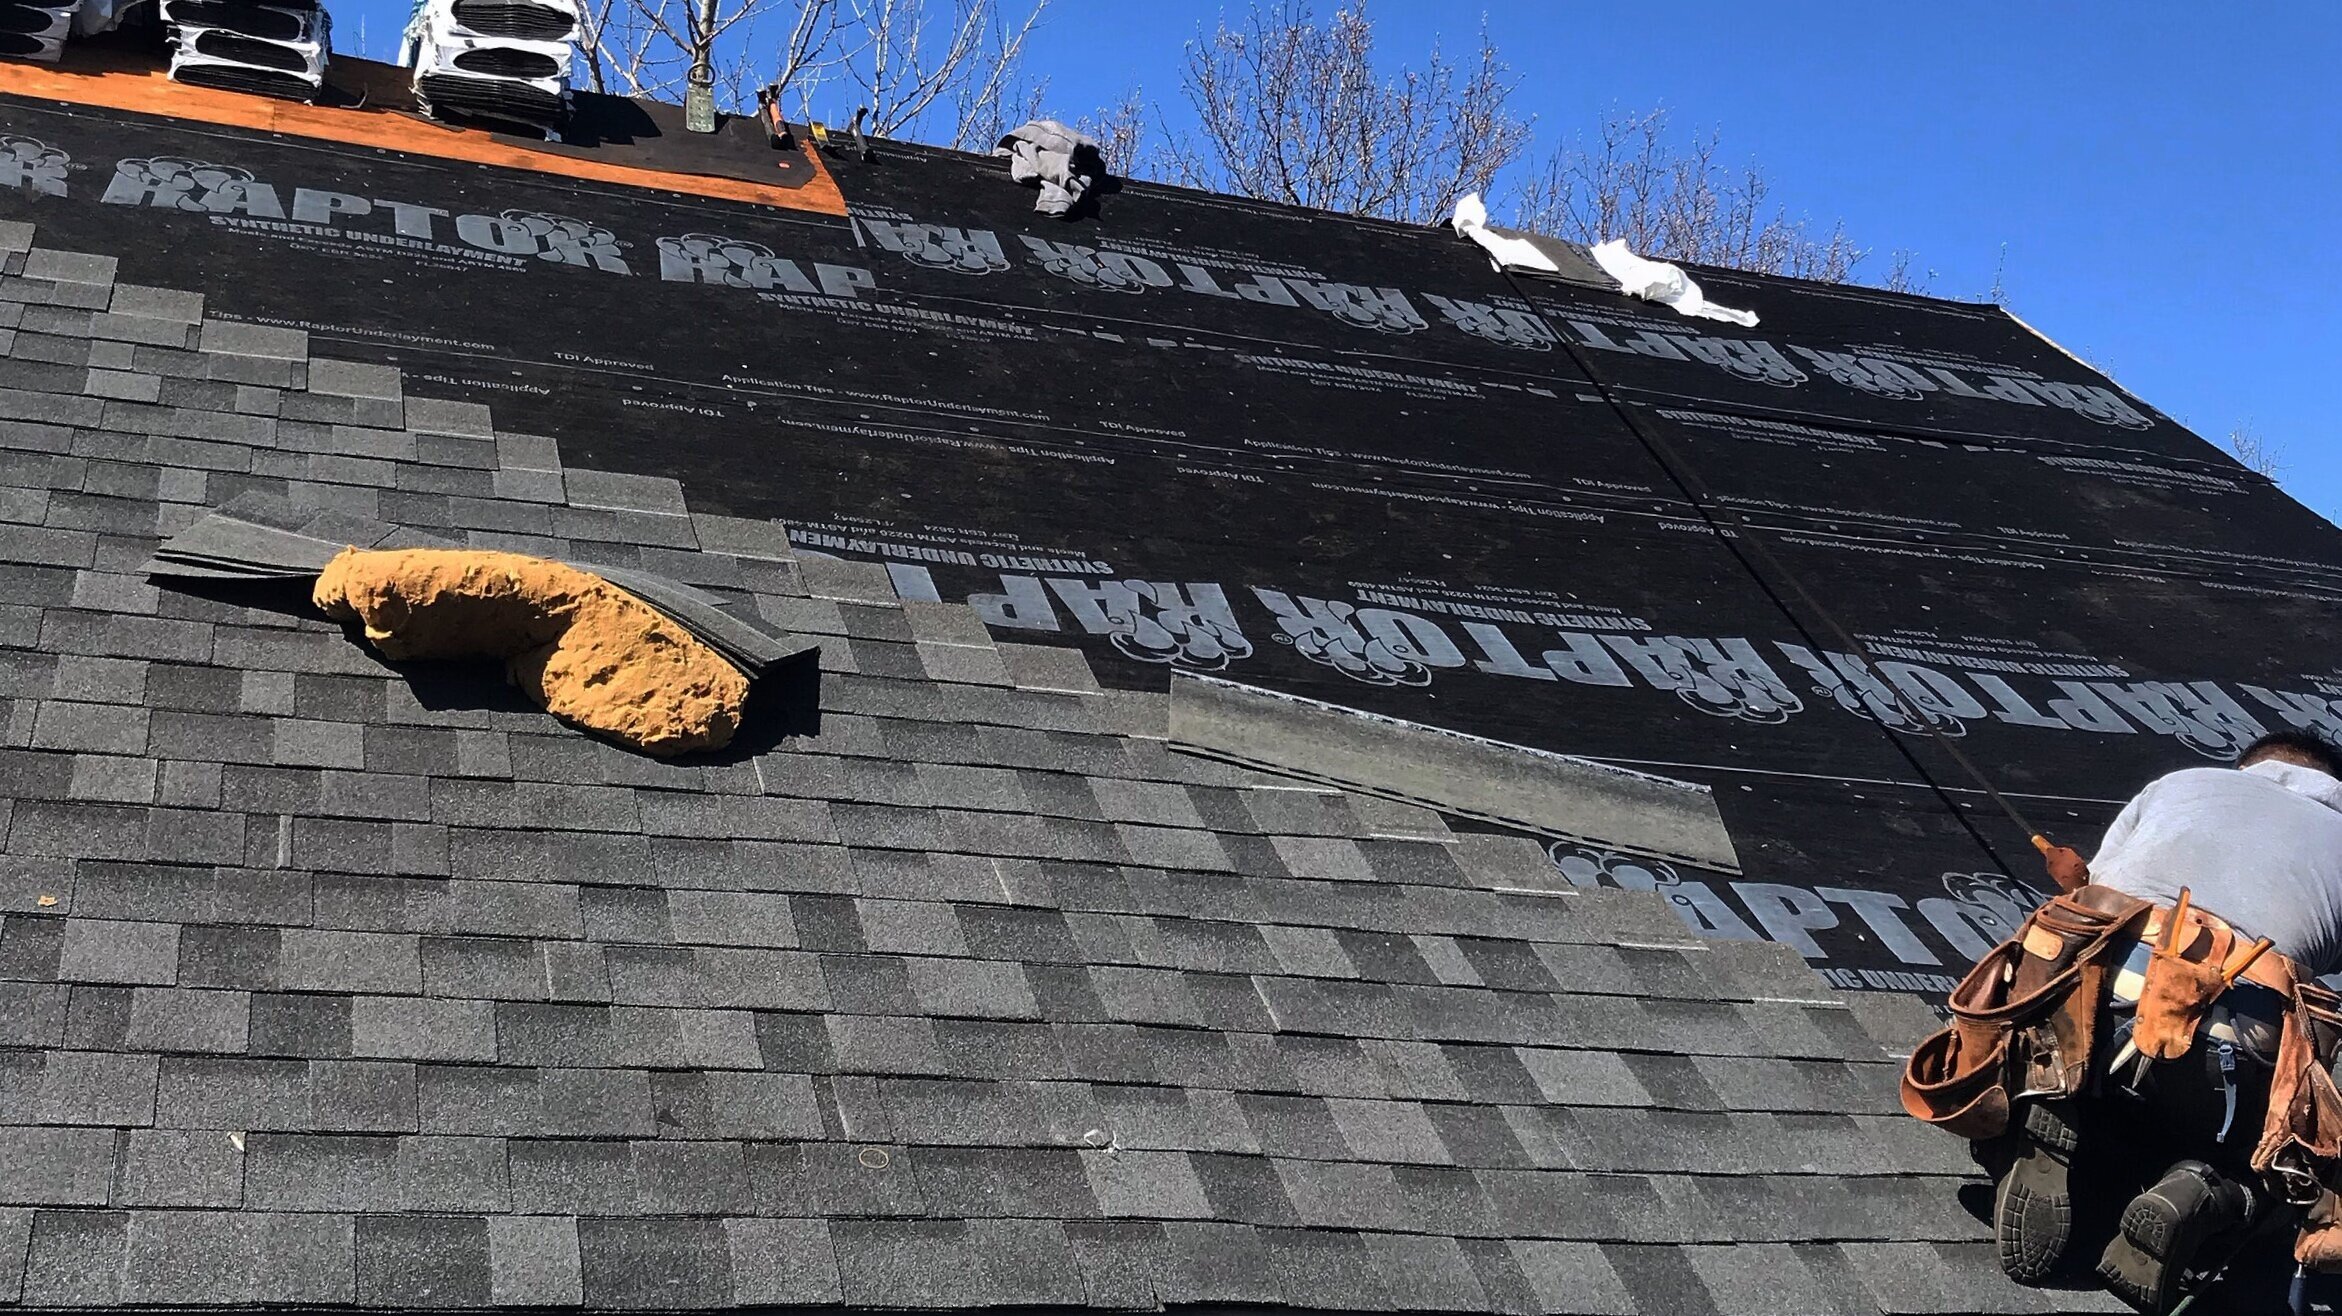 ST. LOUIS' PREMIER HUB FOR ROOF REPLACEMENT